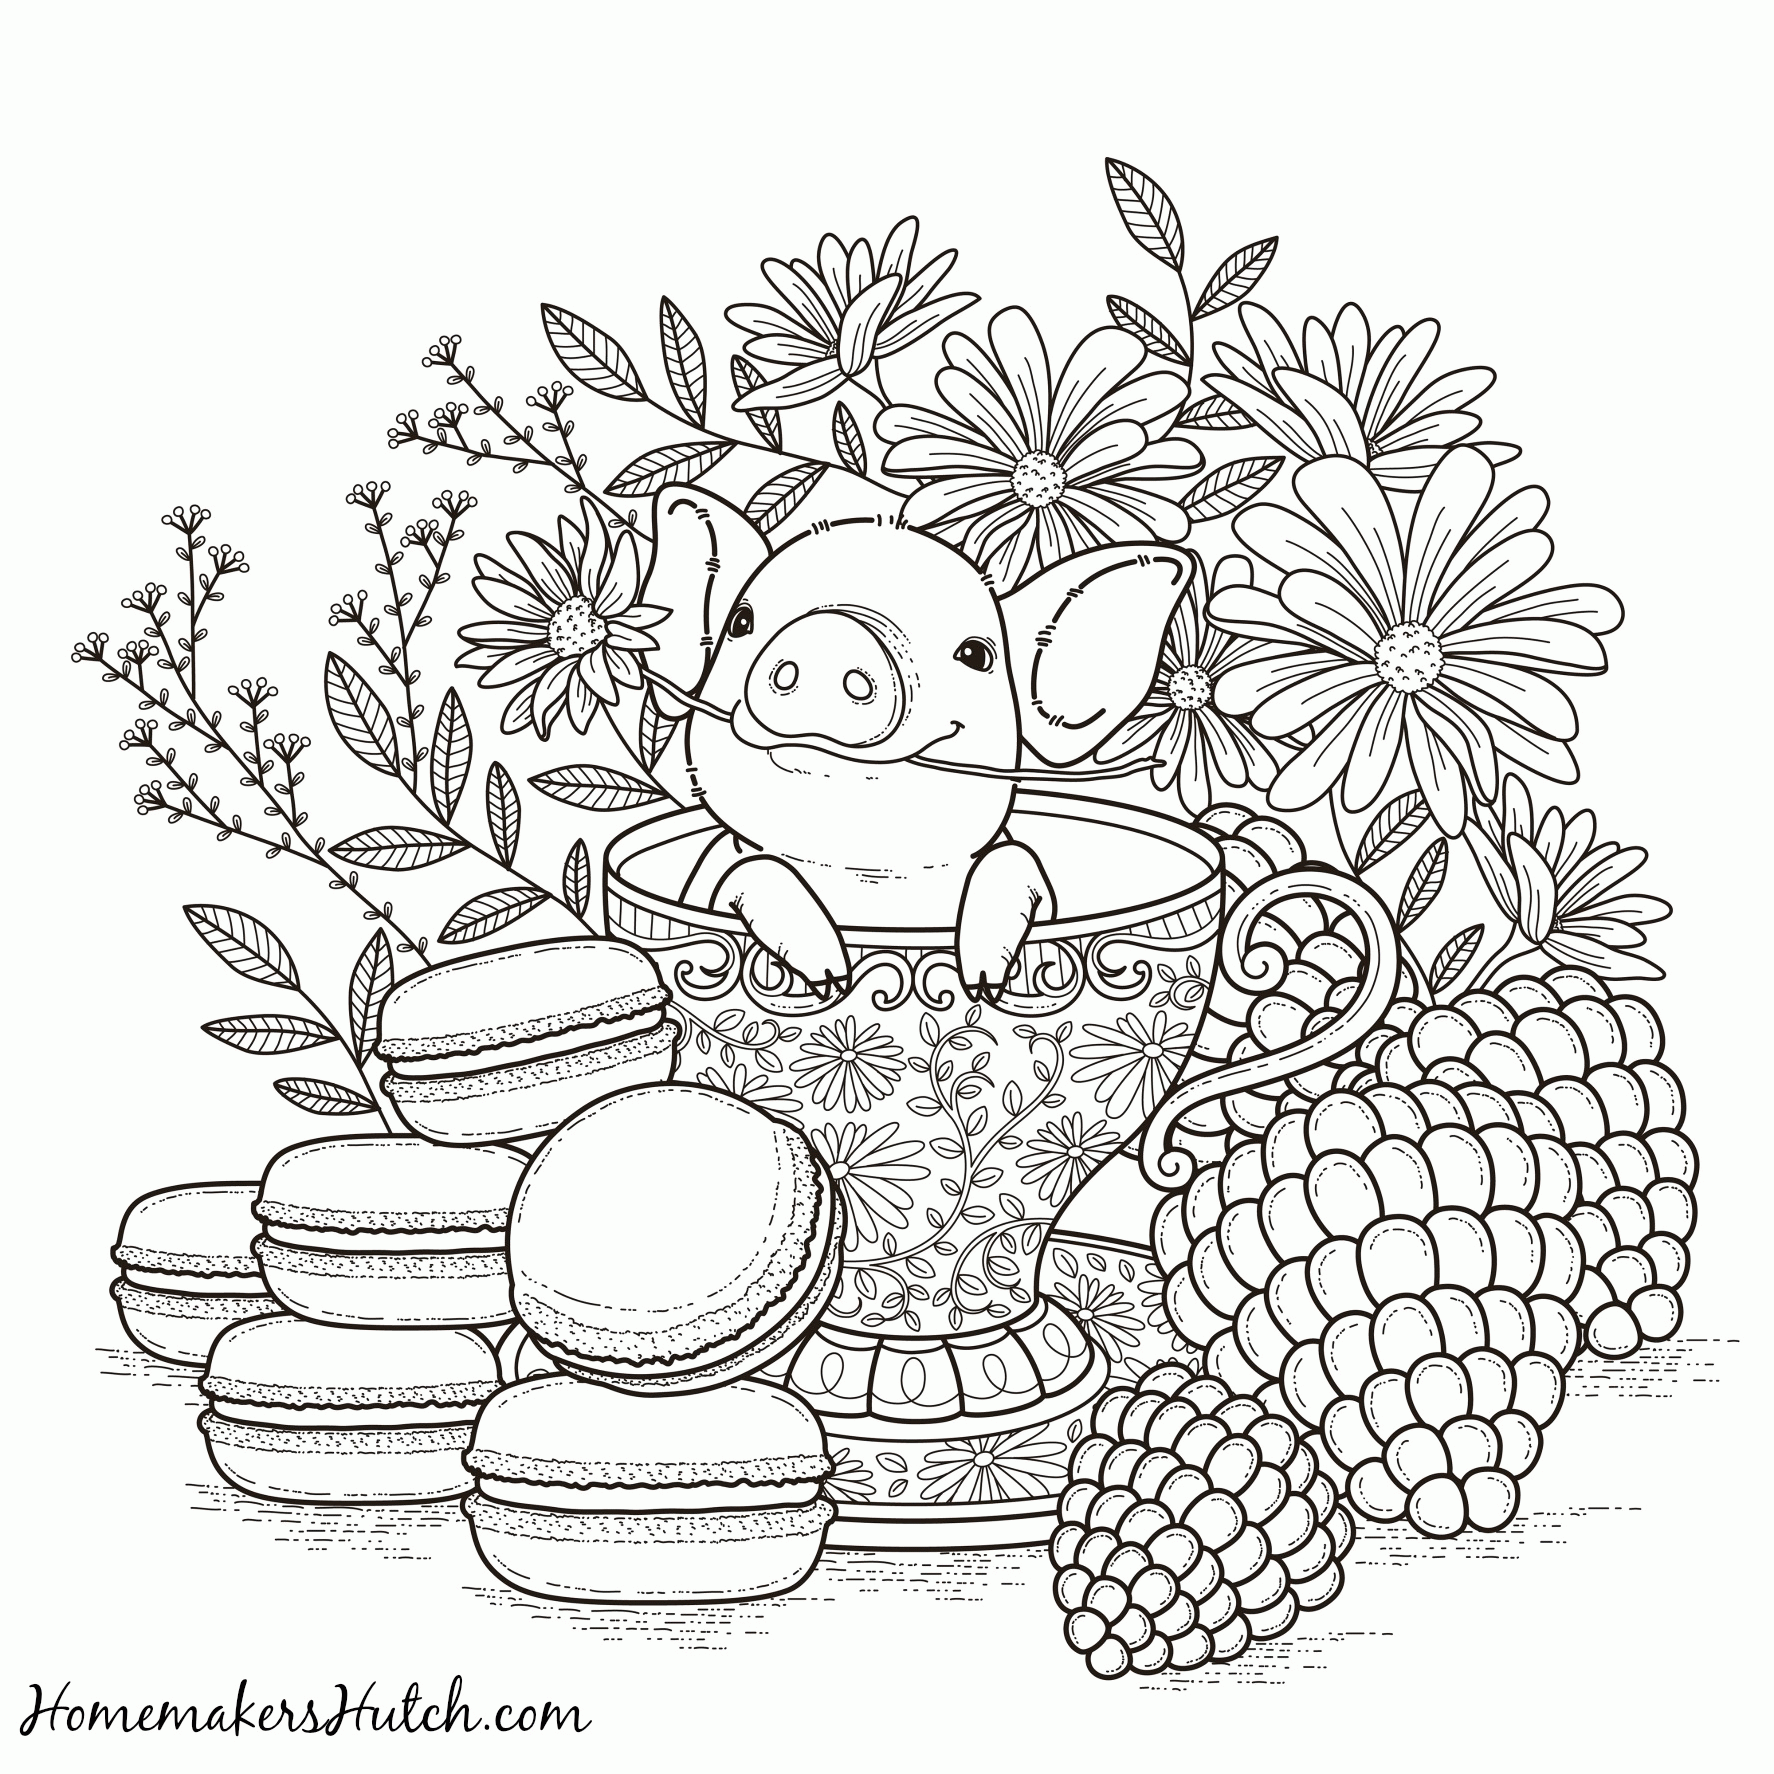 Relaxing Coloring Pages - Coloring Home